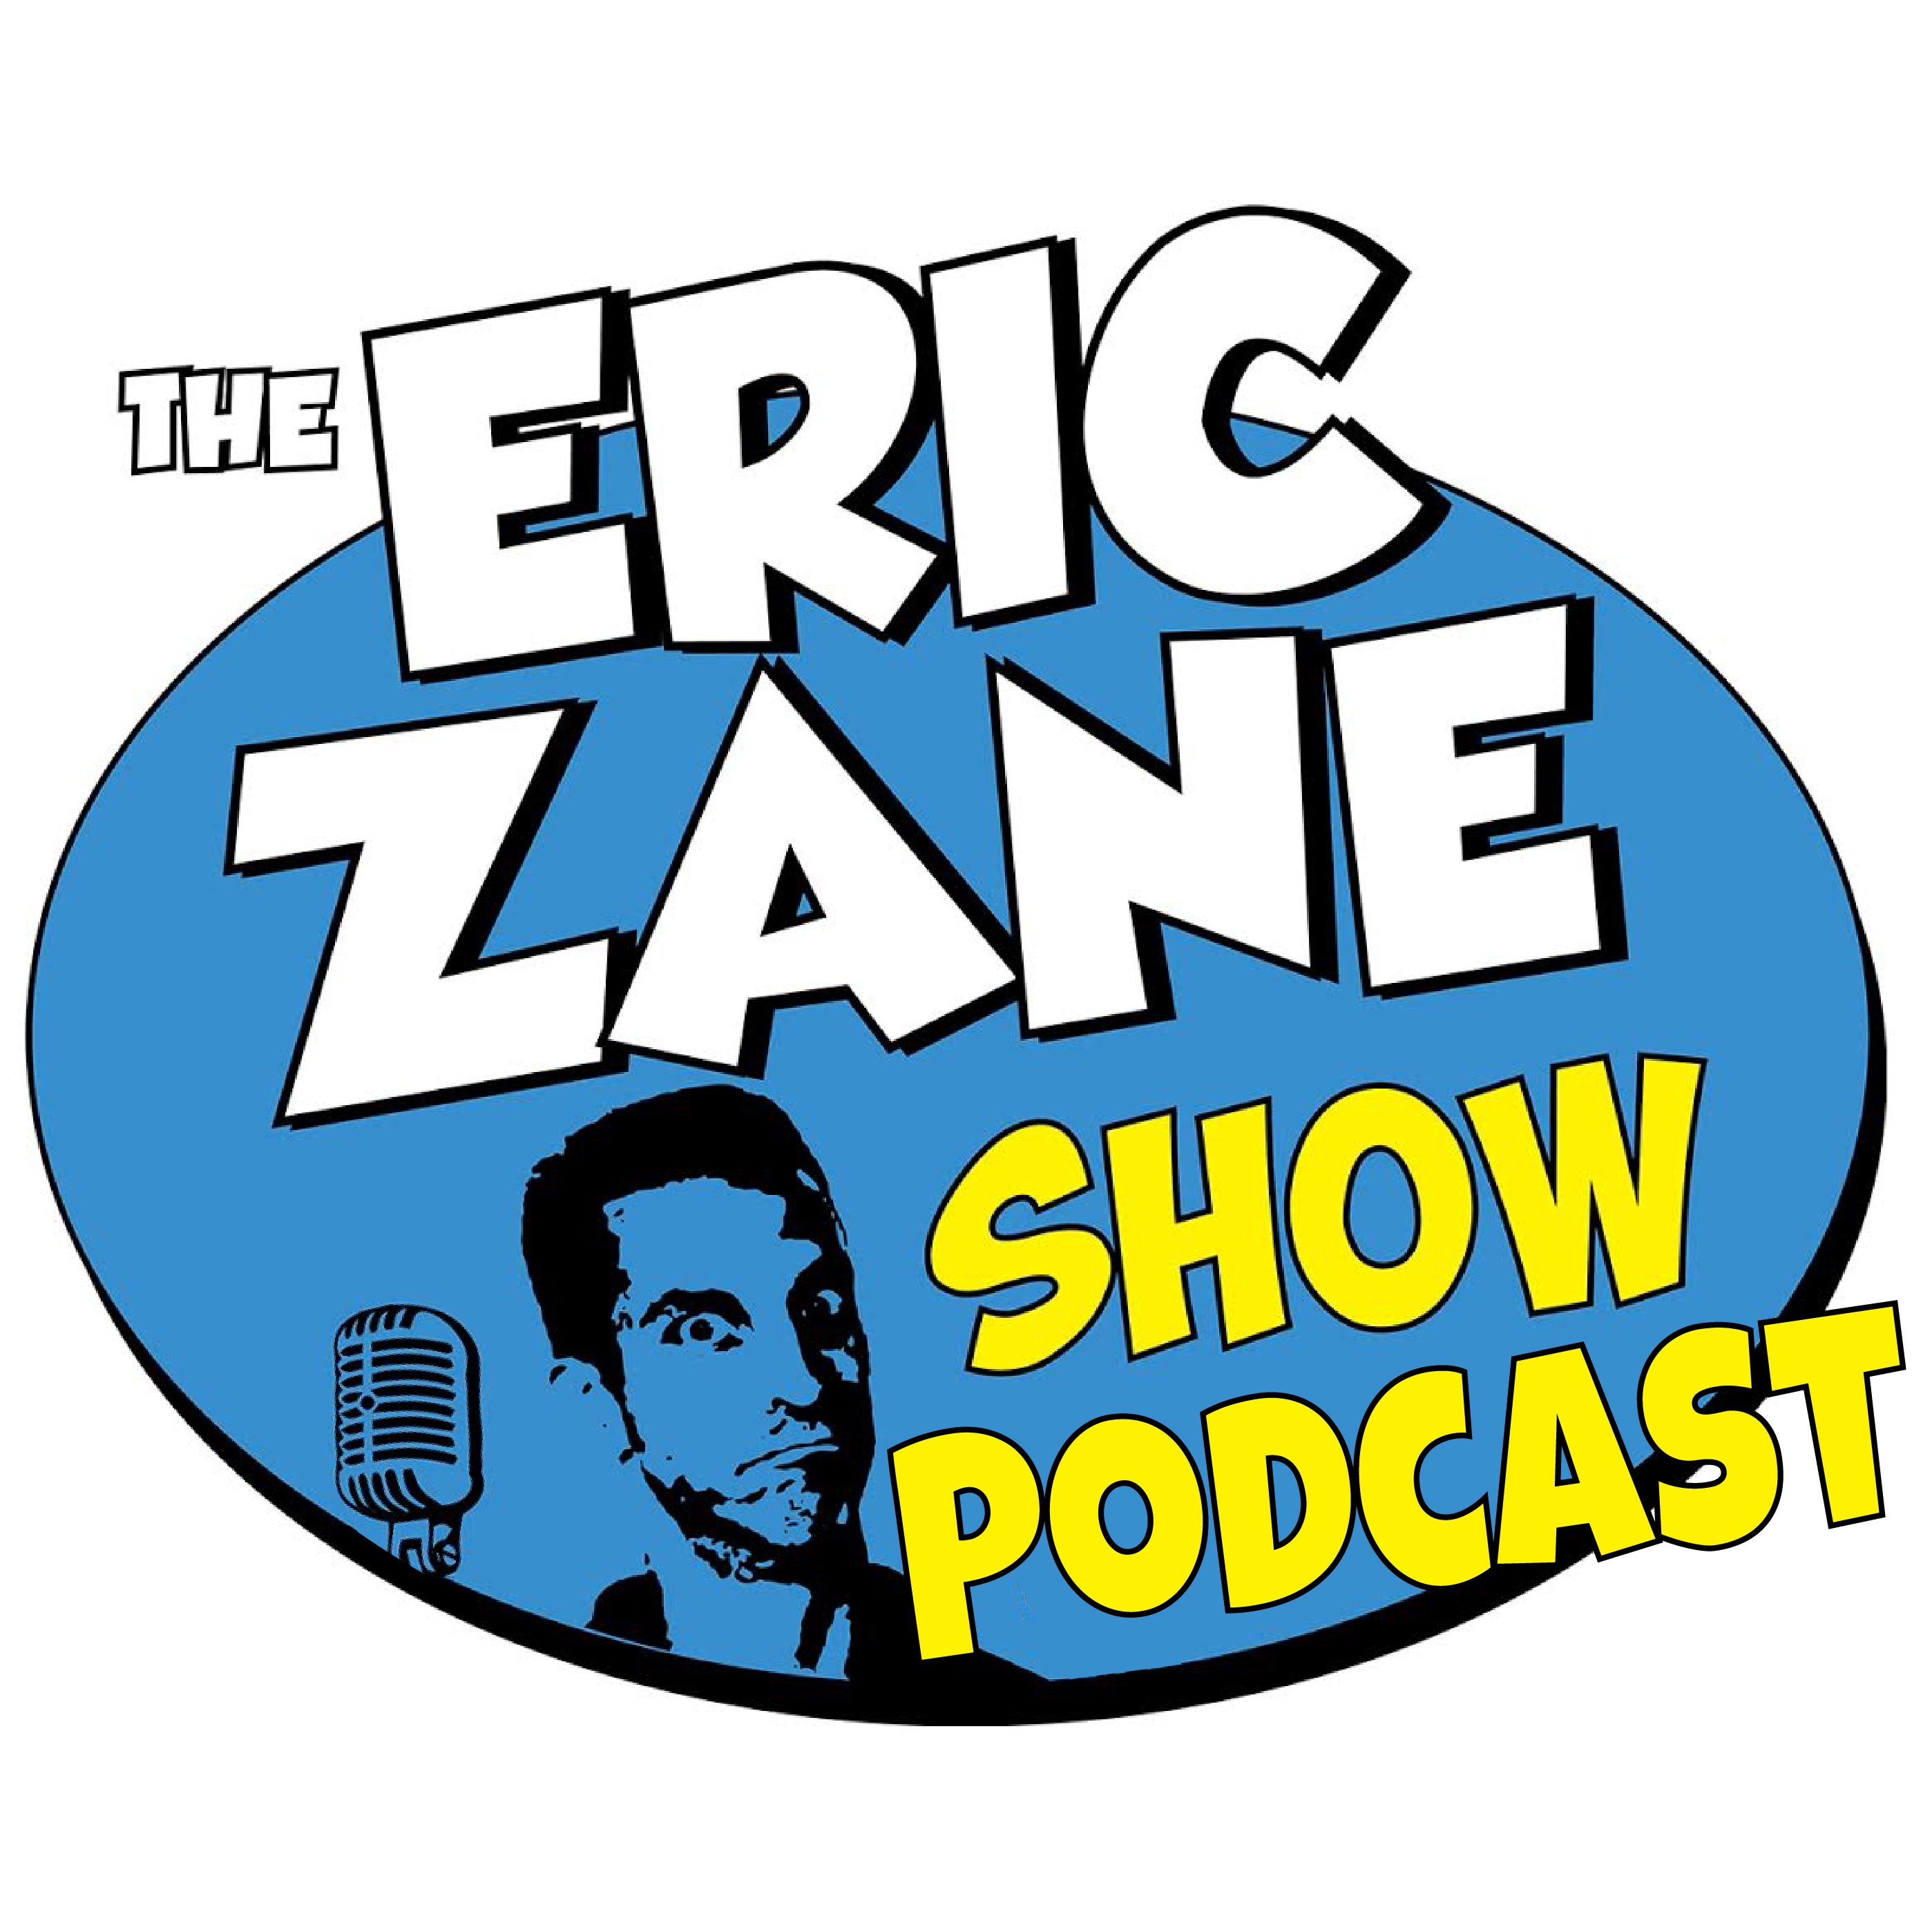 Eric Zane Show Podcast 976 - 4 year Fireversary from WBBL